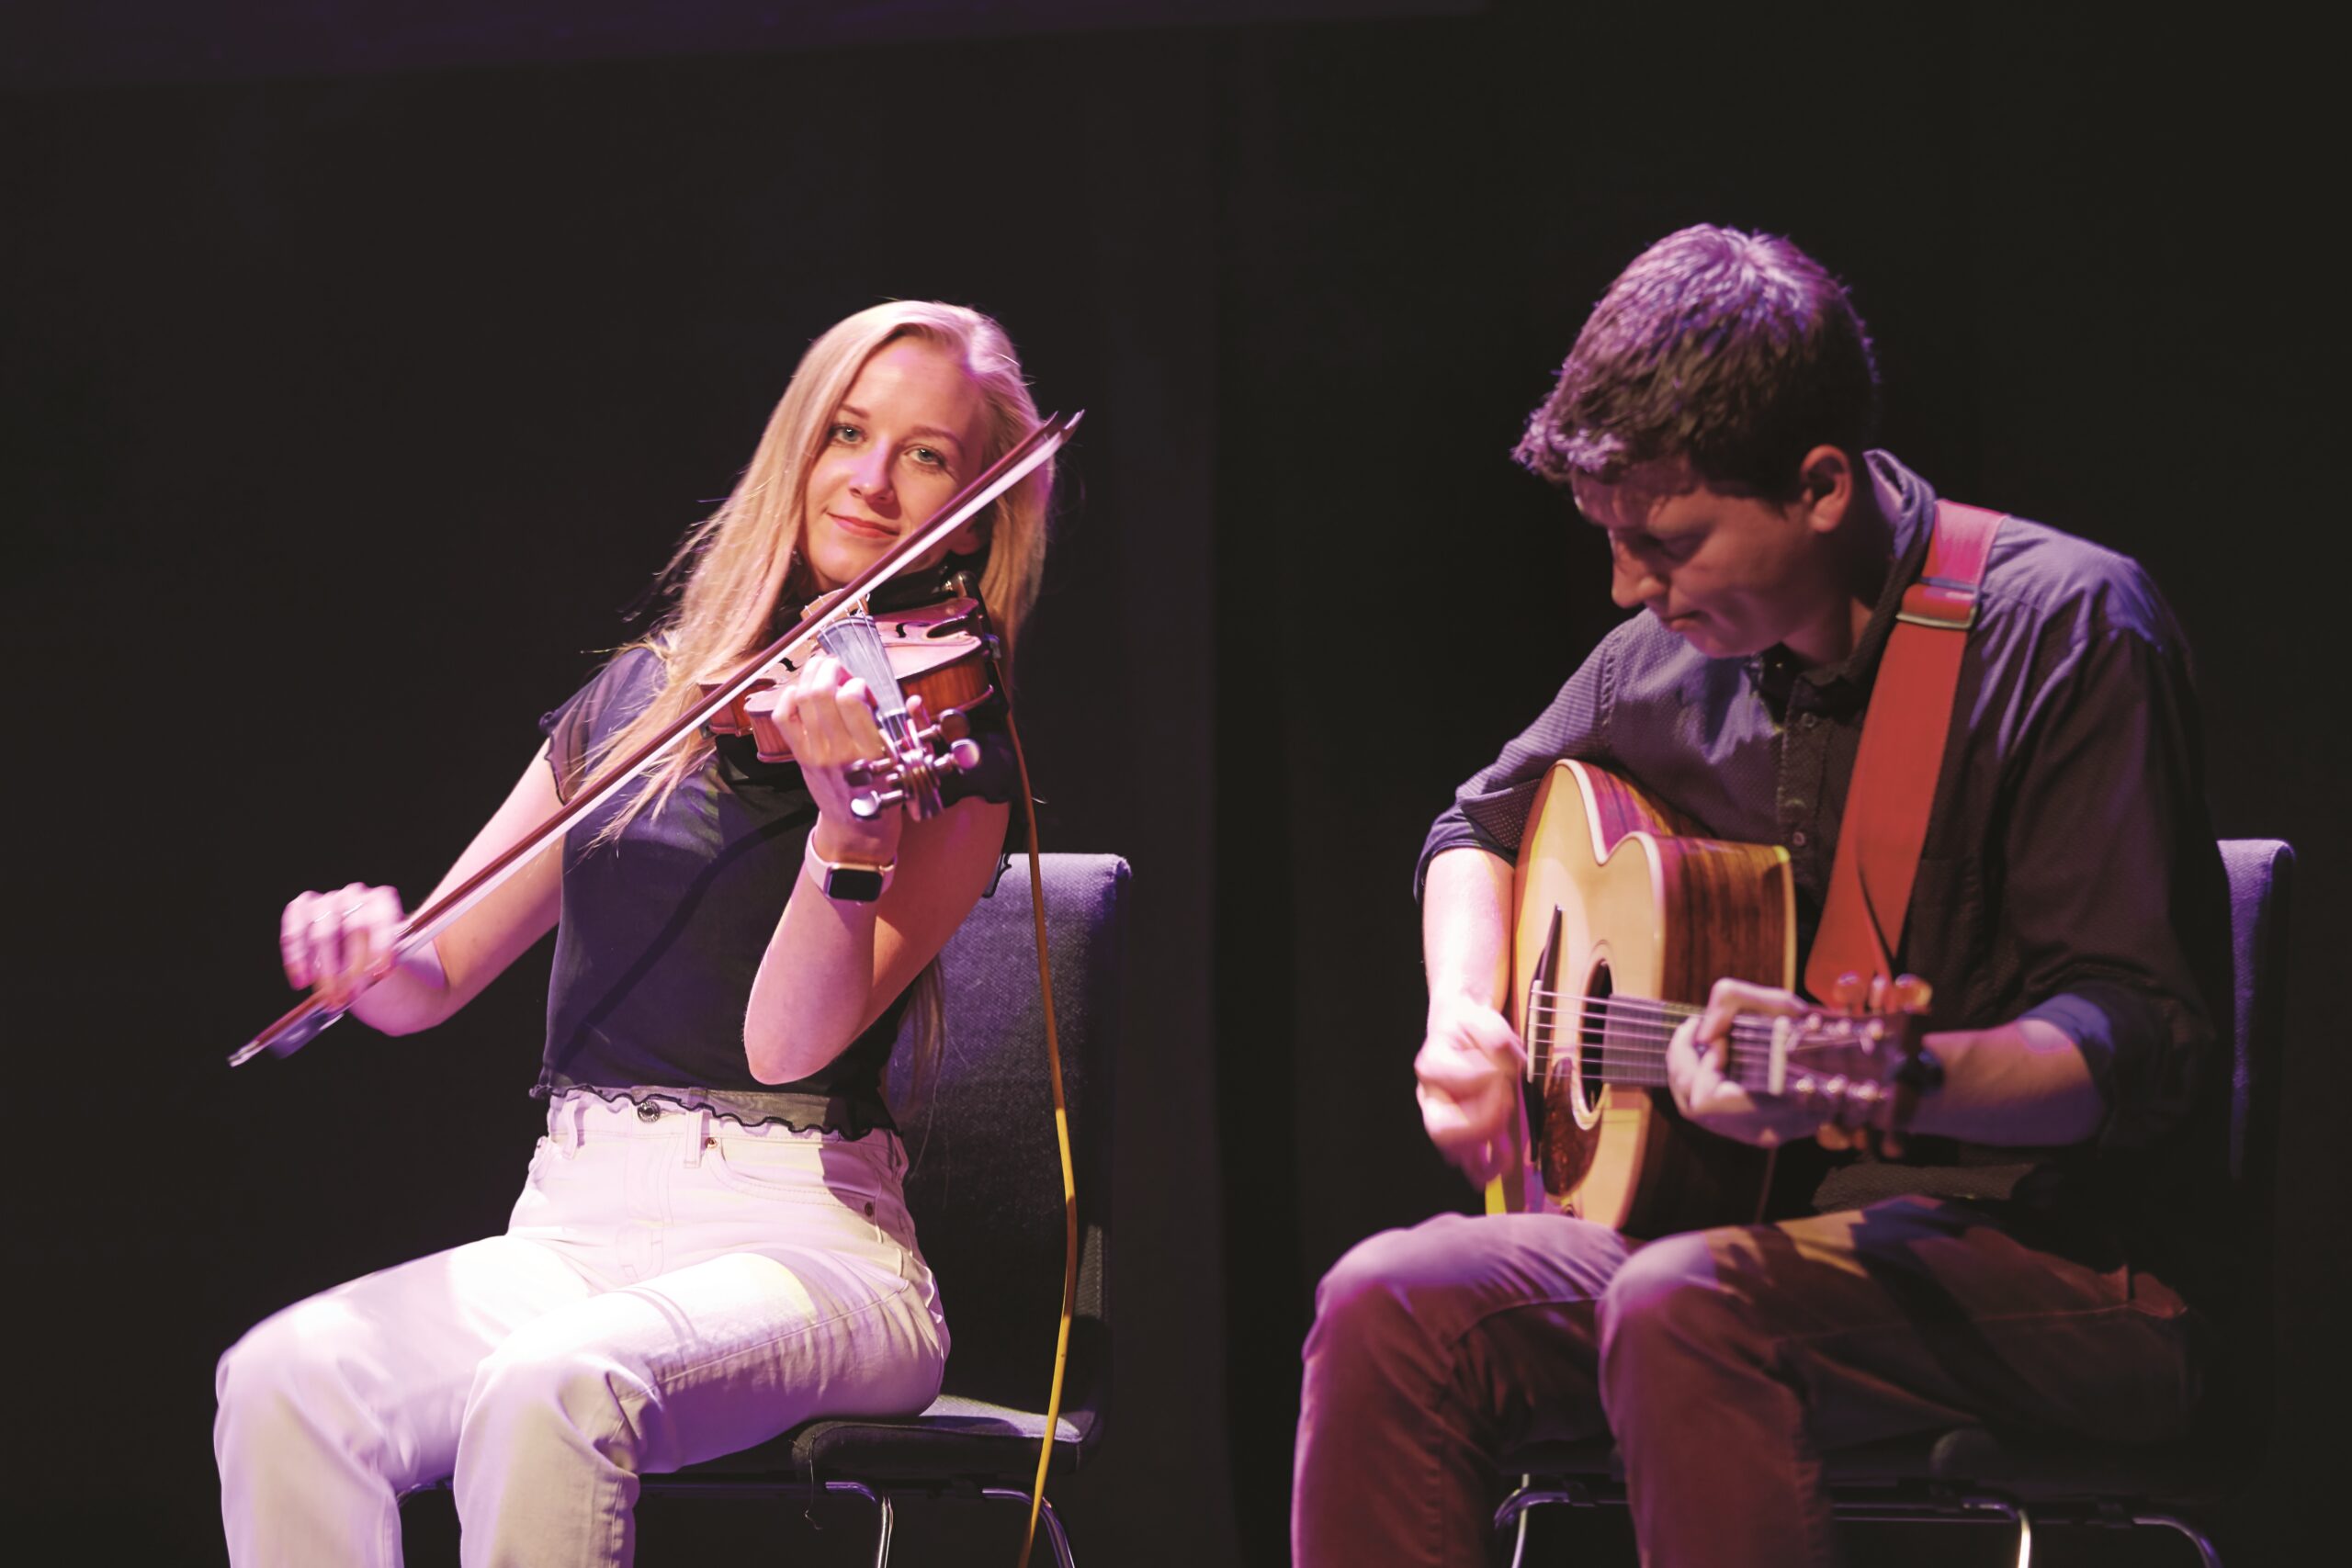 North Atlantic Fiddle Convention is a cultural exchange of artists, academics, and enthusiasts which will take place virtually from June 23-27.